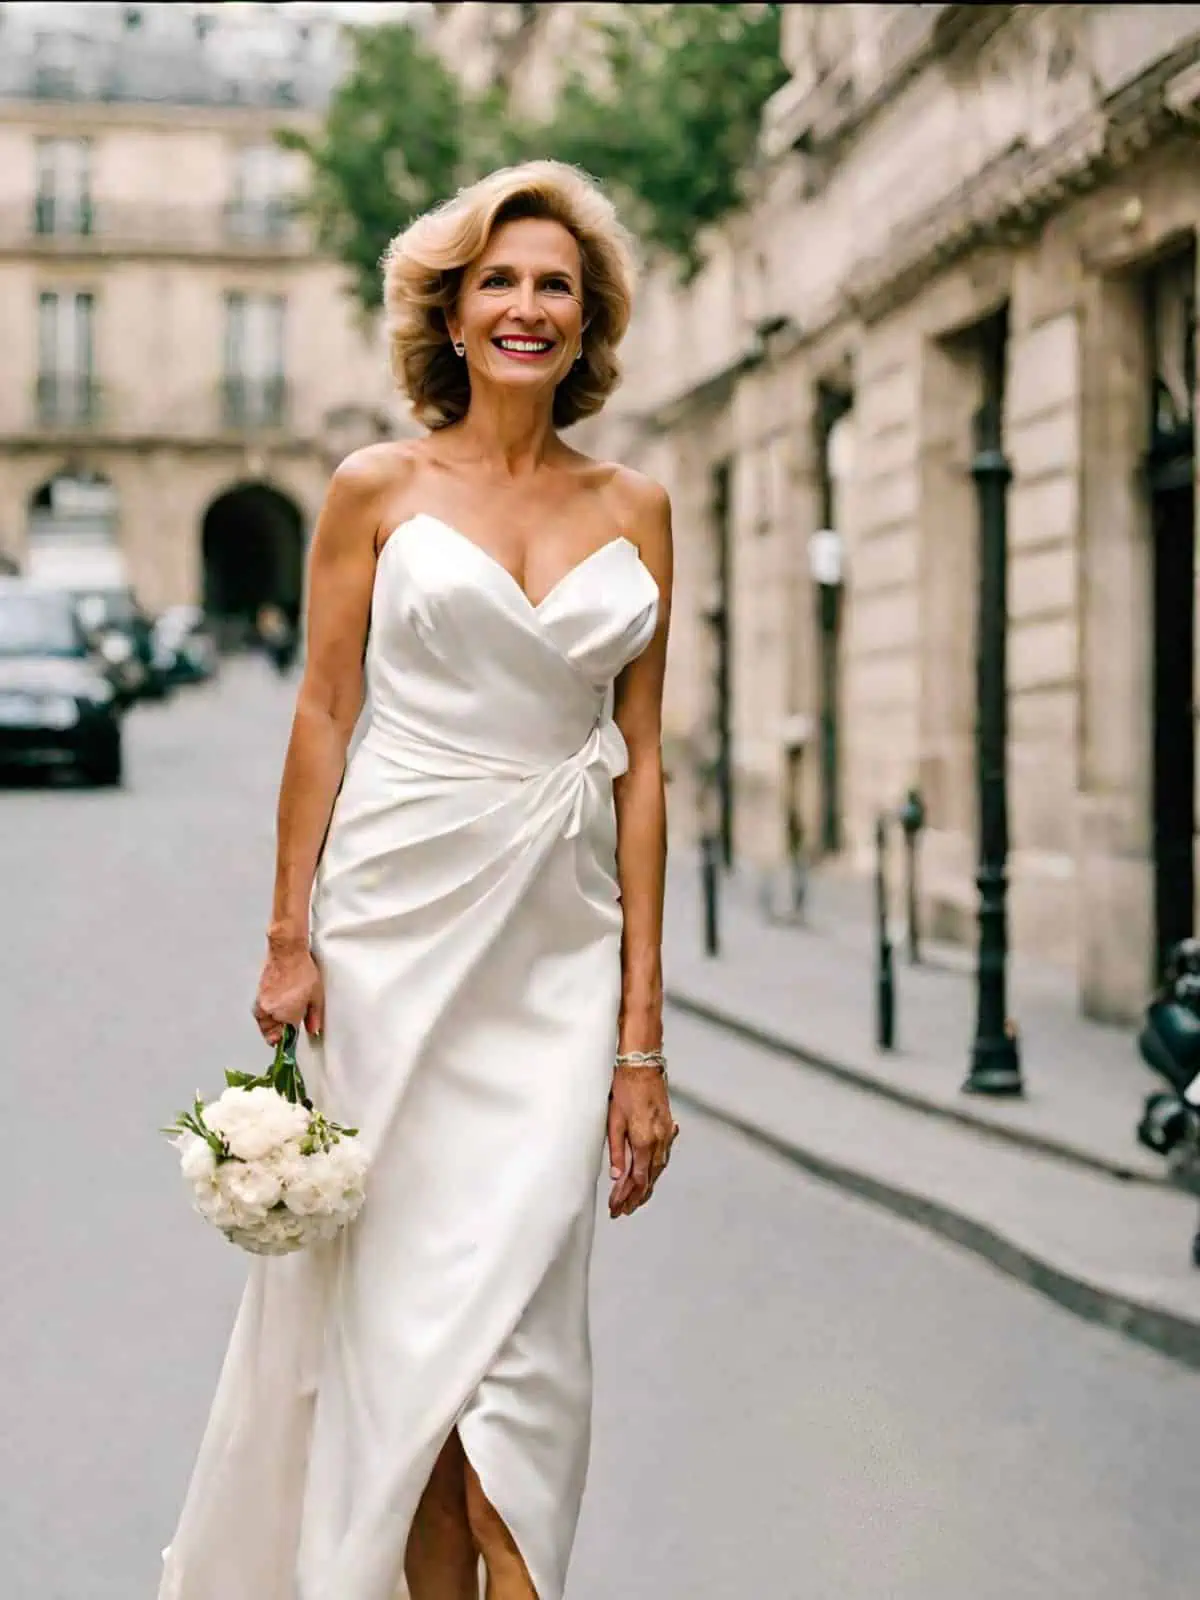 Over 50? These are the Most Stunning Wedding Dresses to Make You Look  Radiant - Petite Dressing